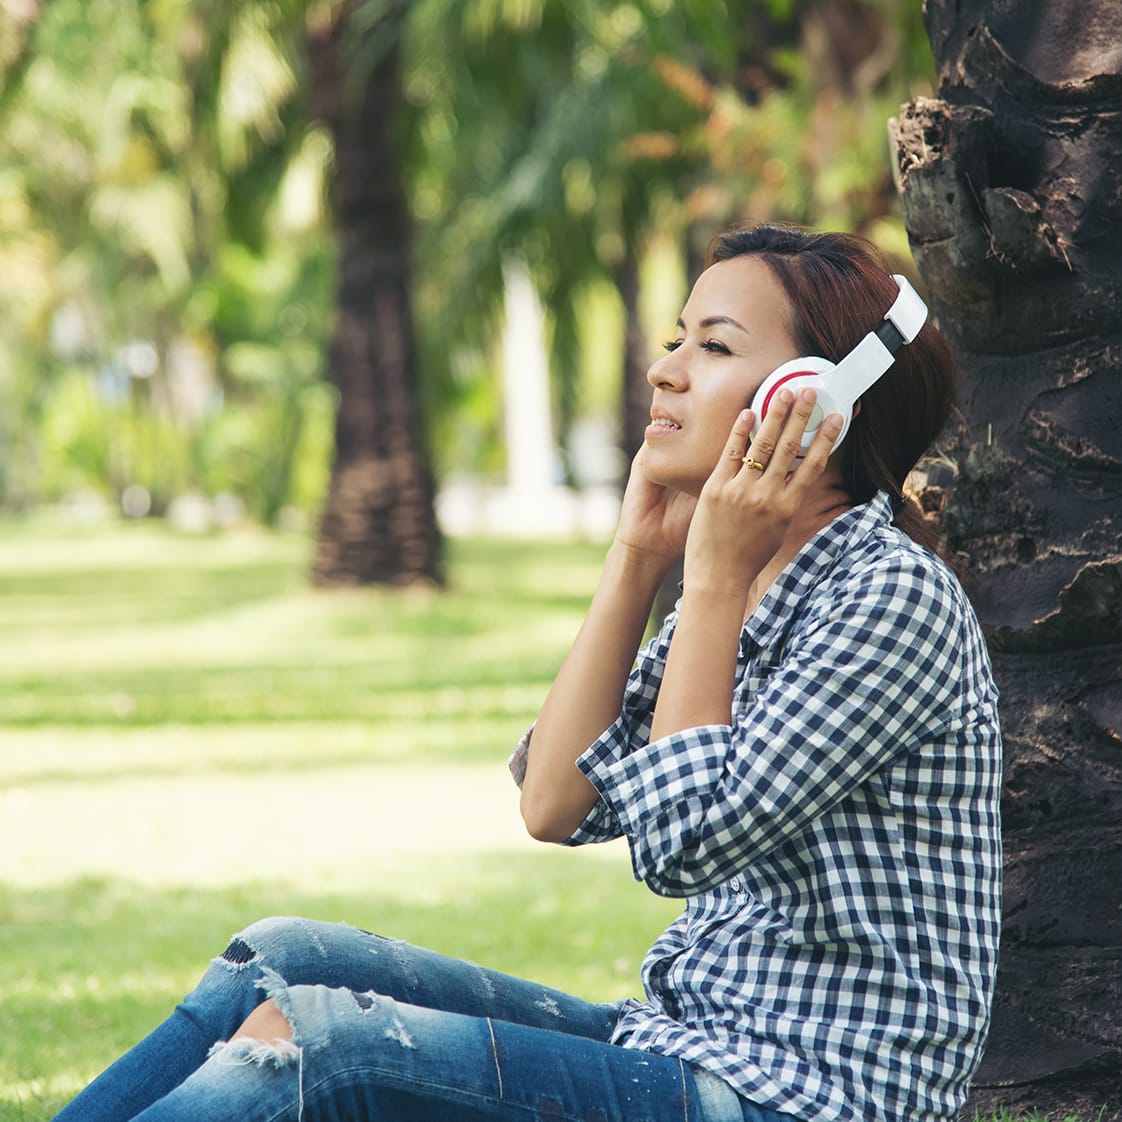 A woman in a plaid shirt and jeans sits by a tree, enjoying music on her headphones, in a sunny park.